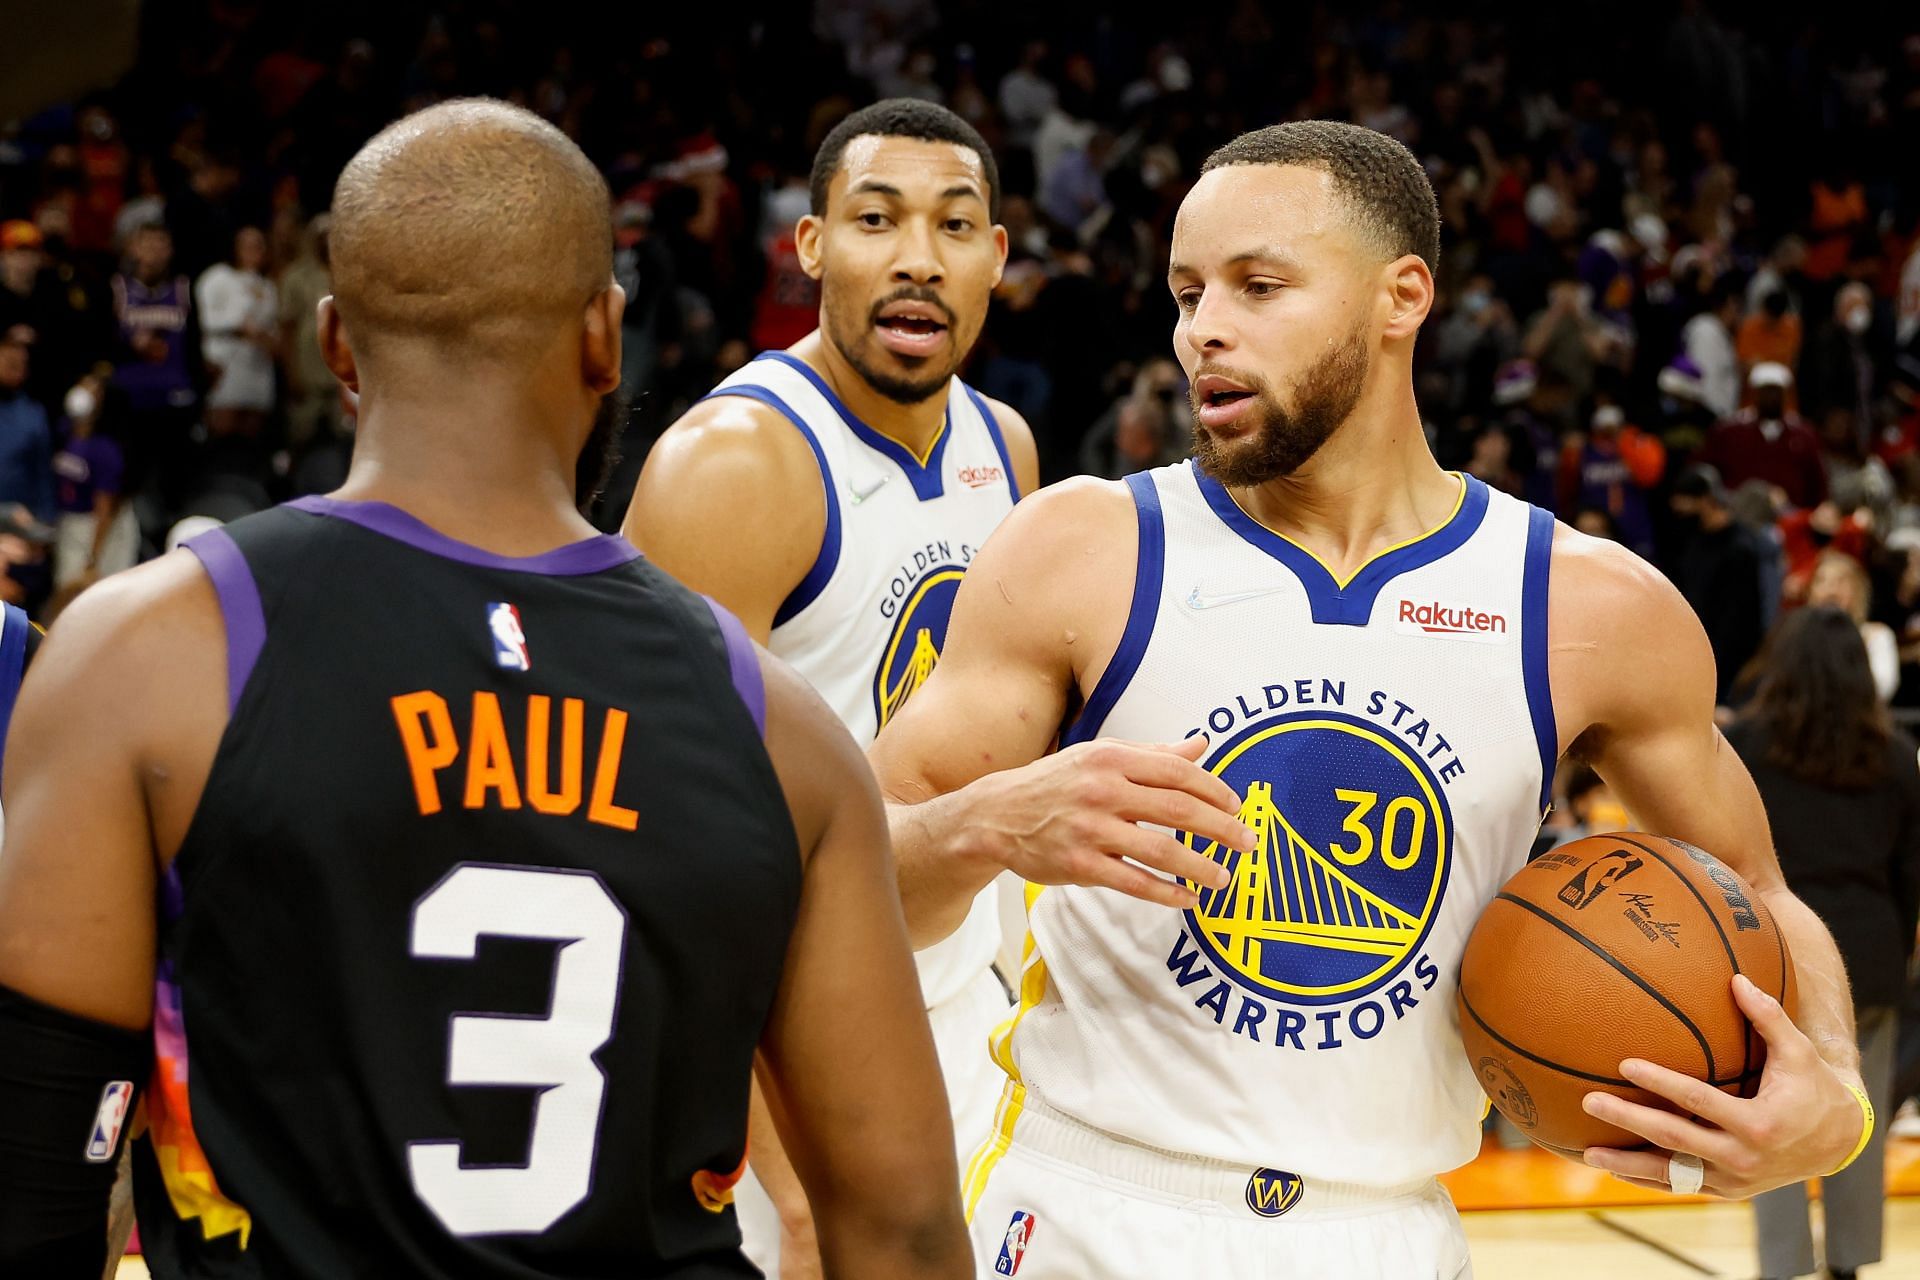 Steph Curry of the Golden State Warriors against Chris Paul of the Phoenix Suns on 2021 Christmas Day